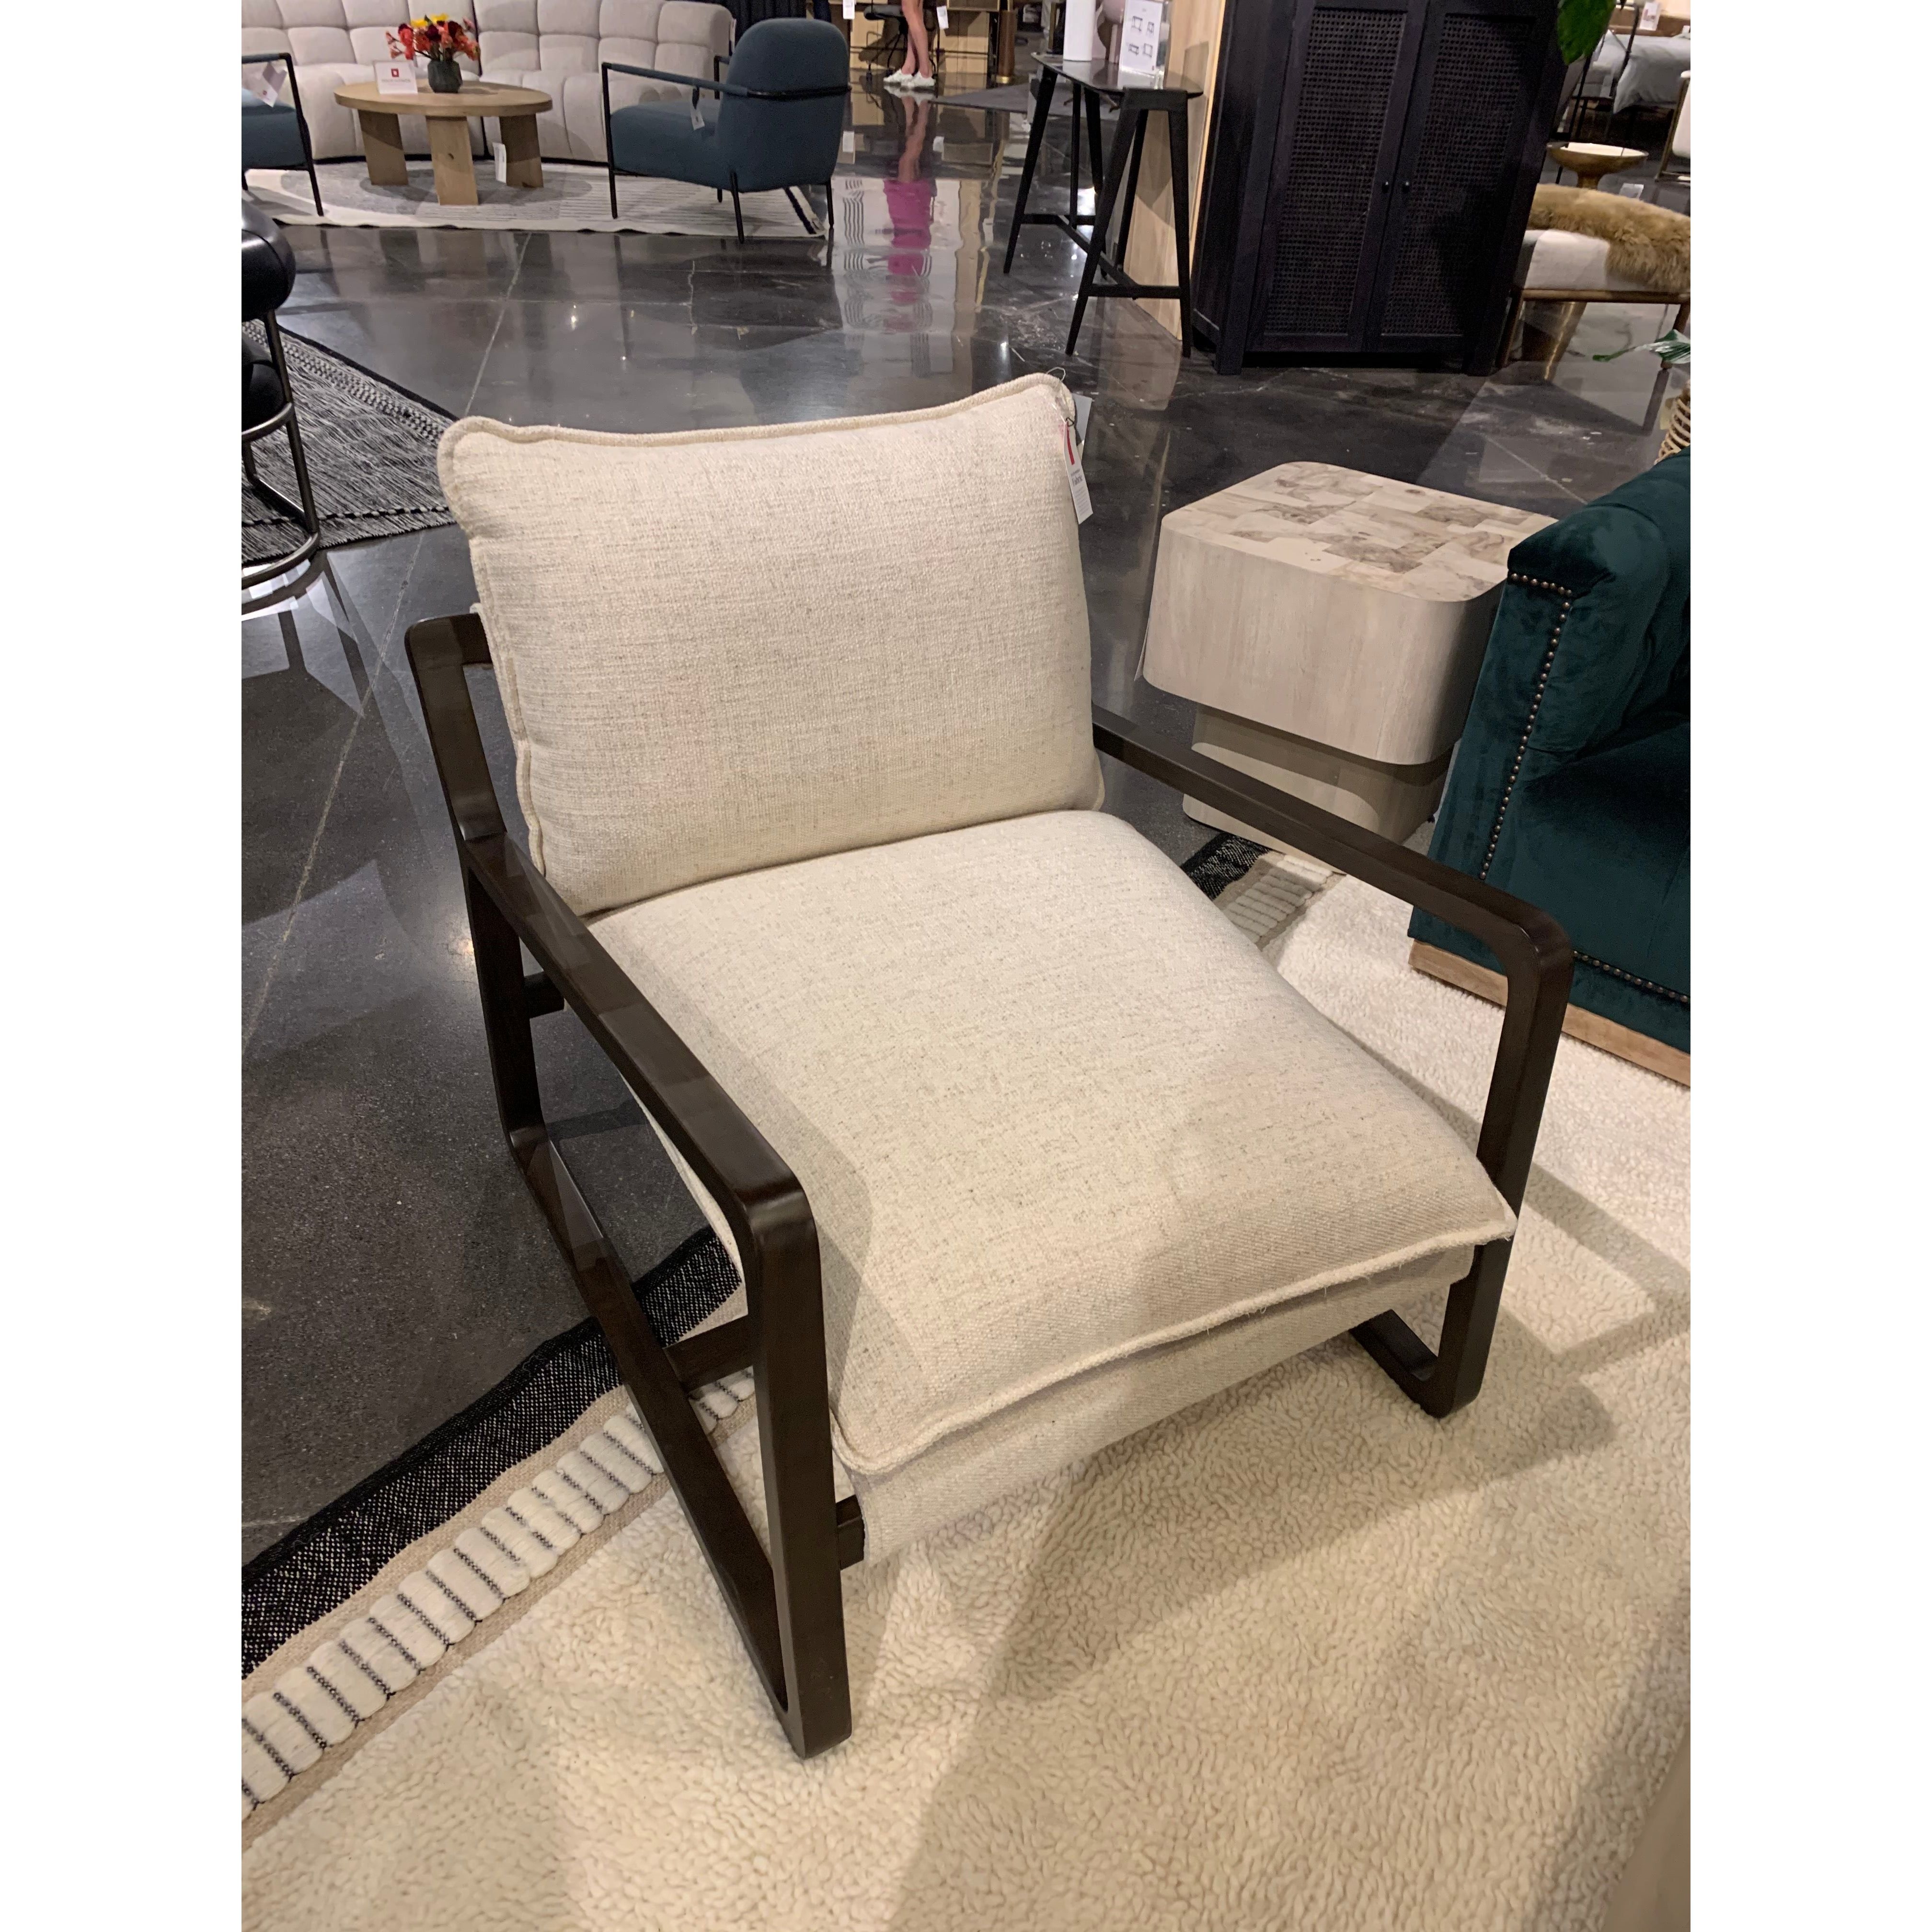 The Ace Thames Cream Chair has a gorgeous, solid parawood base with large, comfortable cushions. The perfect chair to relax or curl up with a good book in your living room or bedroom.   Overall Dimensions: 30.00"w x 37.50"d x 31.00"h